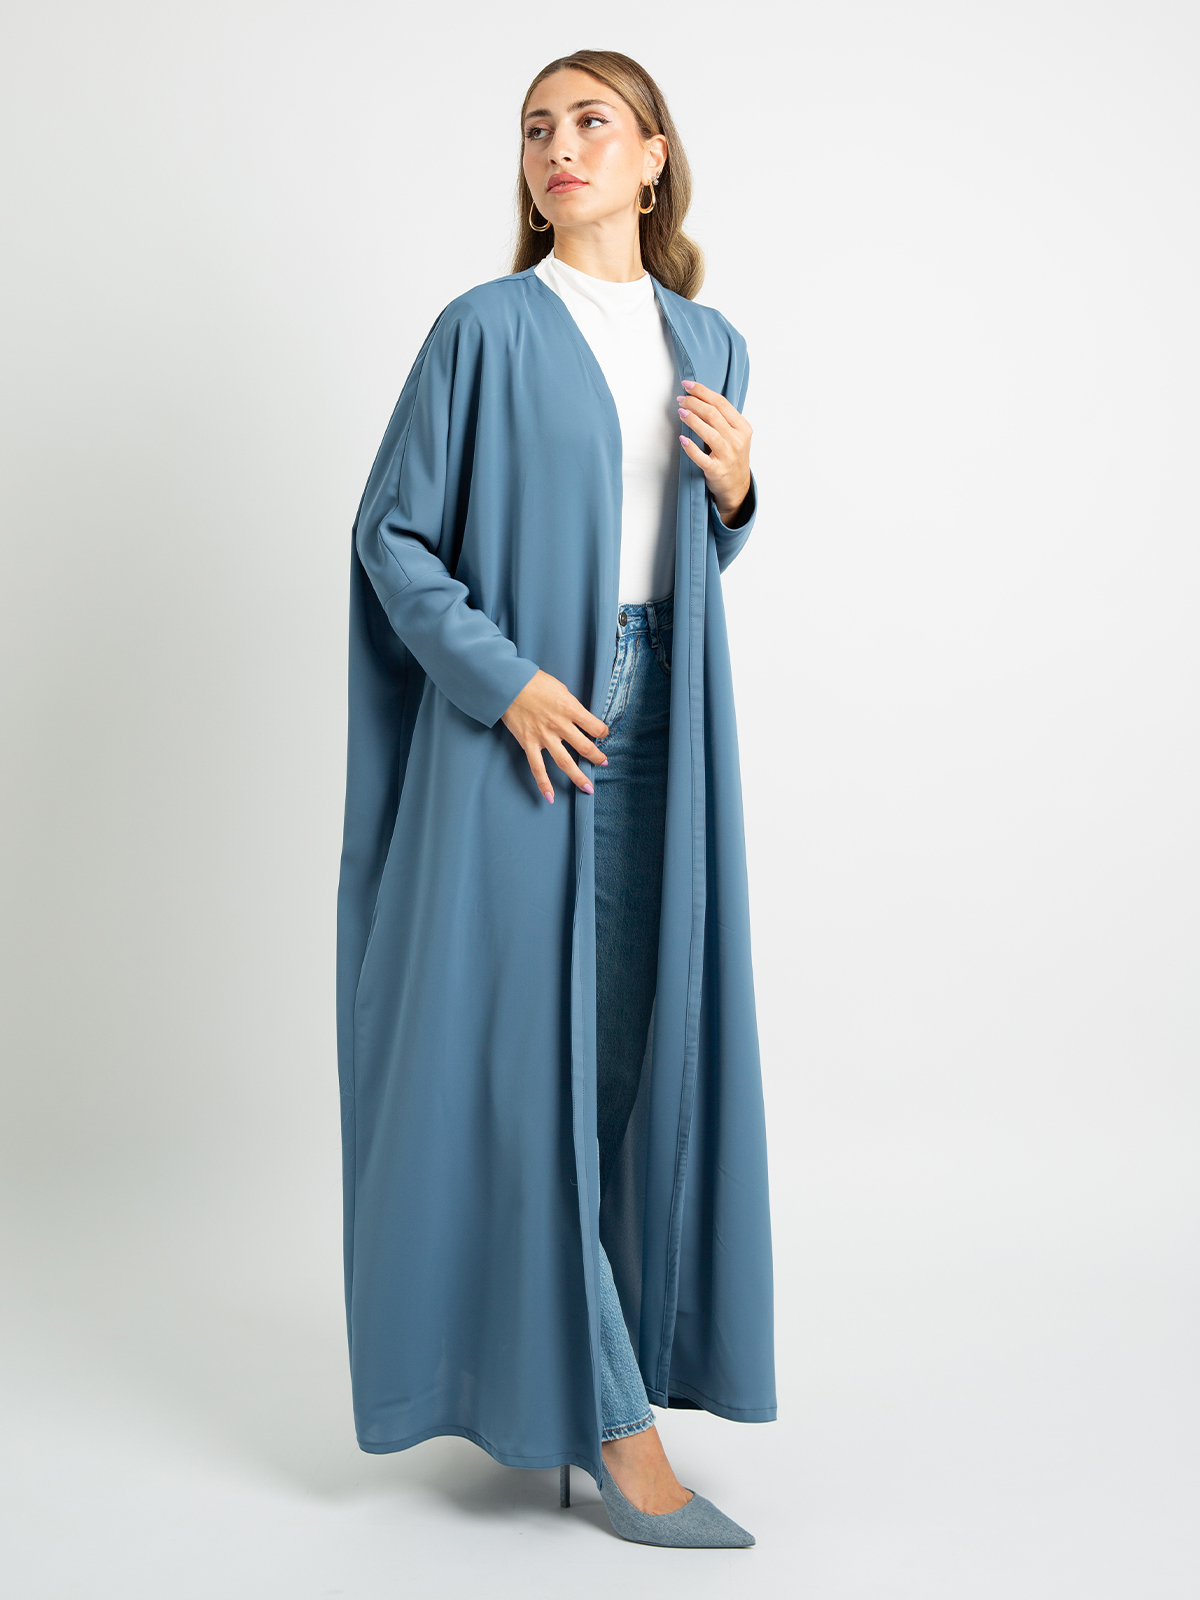 Blue long open half bisht abaya in high quality light fabric by kaafmeem for work and everyday wear 